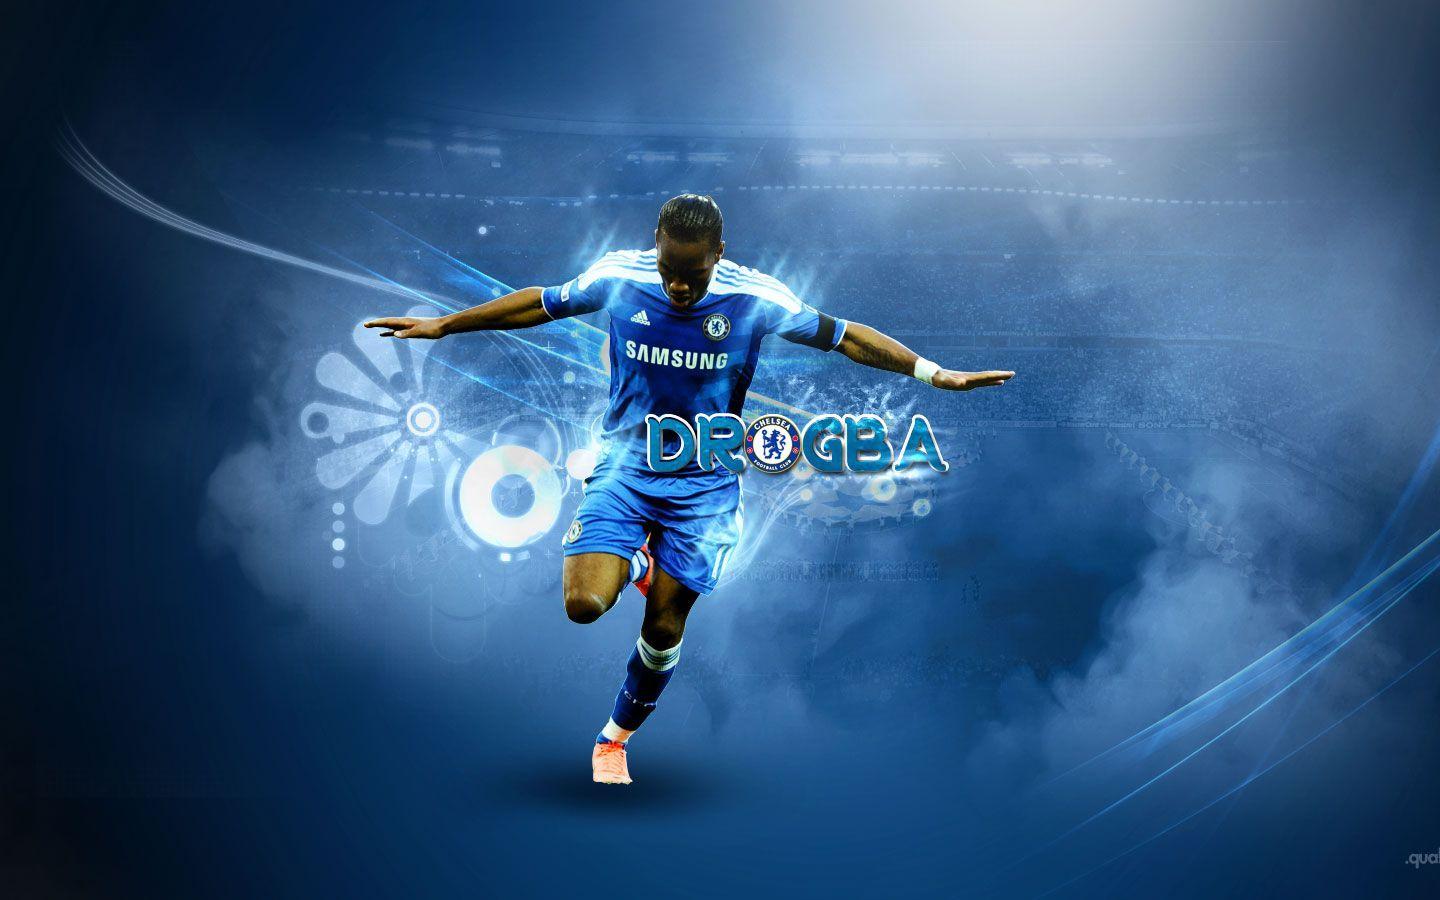 1920x1080 / 1920x1080 didier drogba hd background - Coolwallpapers.me!